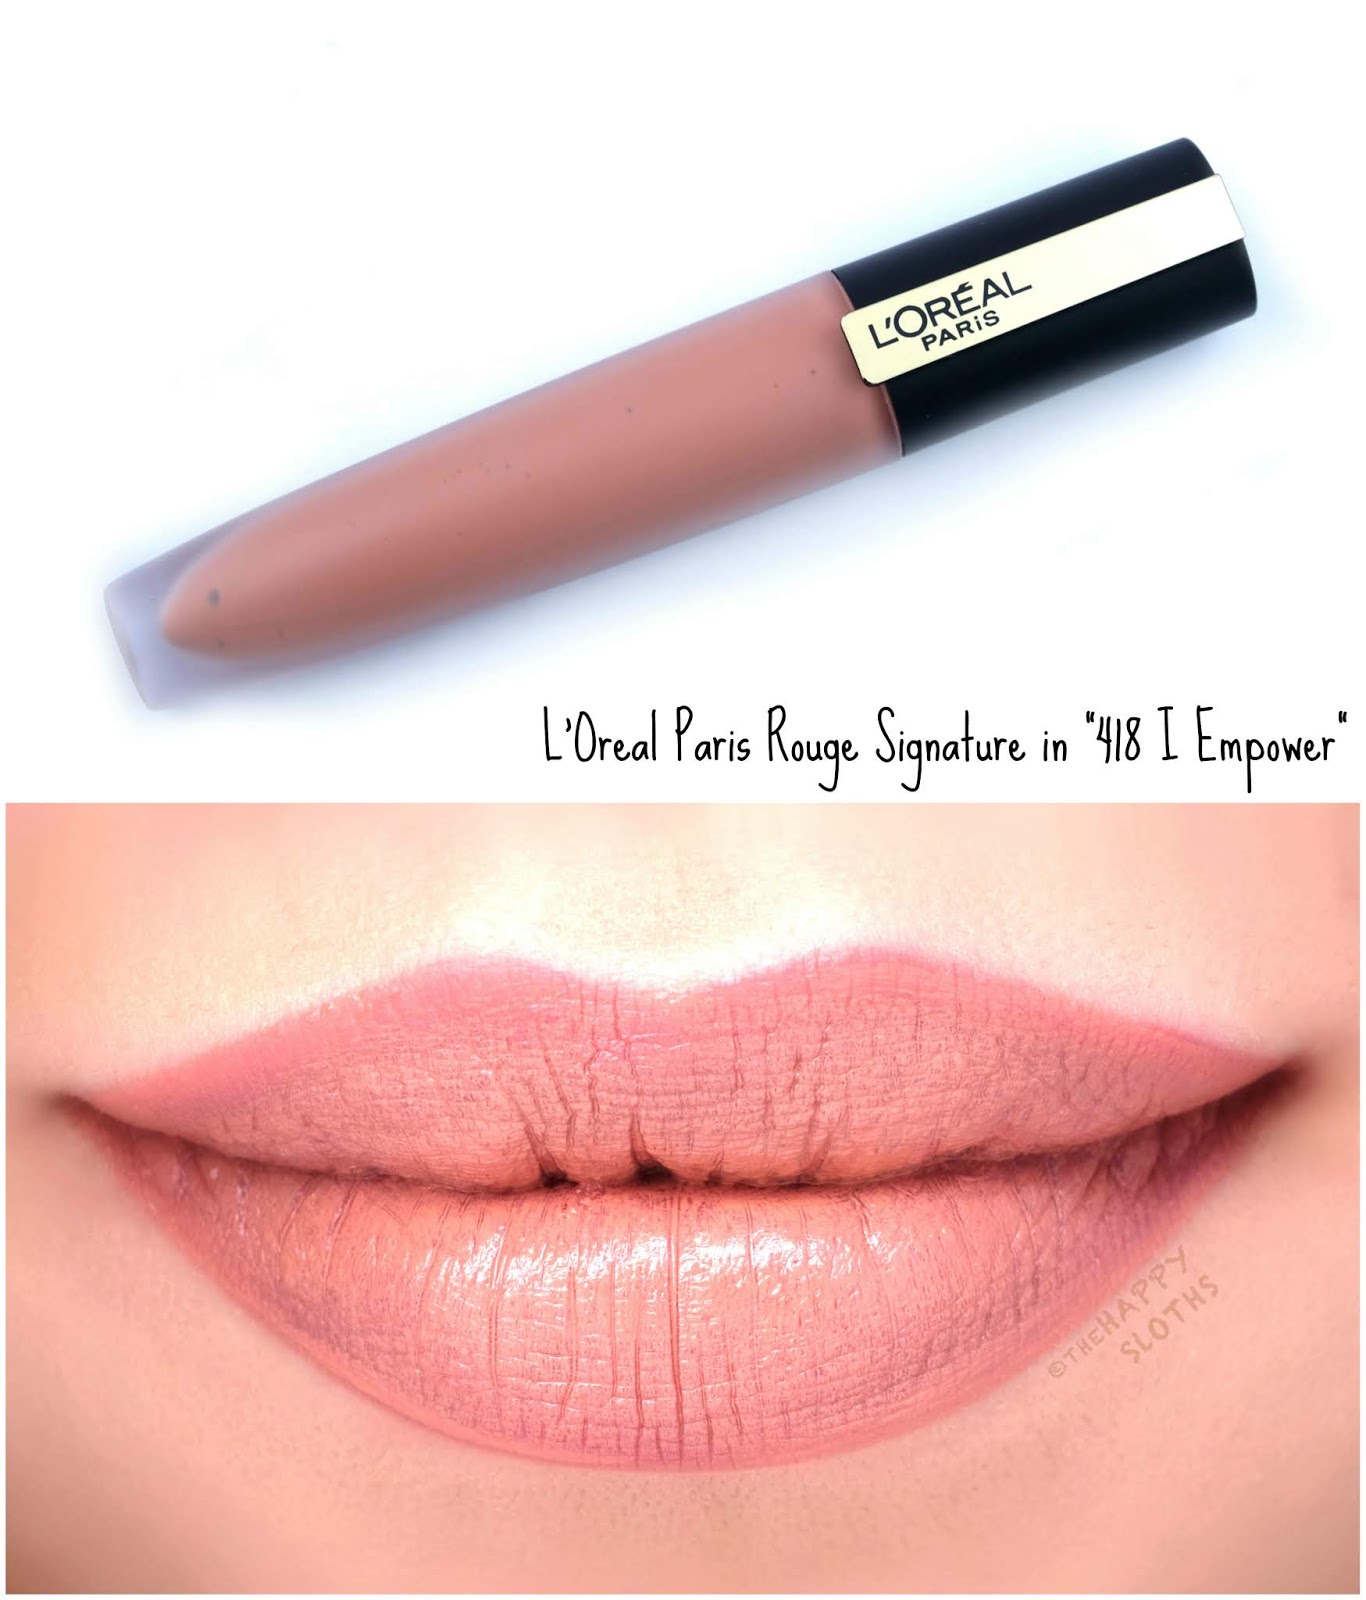 L'Oreal | Rouge Signature Matte Liquid Lipstick in "418 I Empower": Review and Swatches